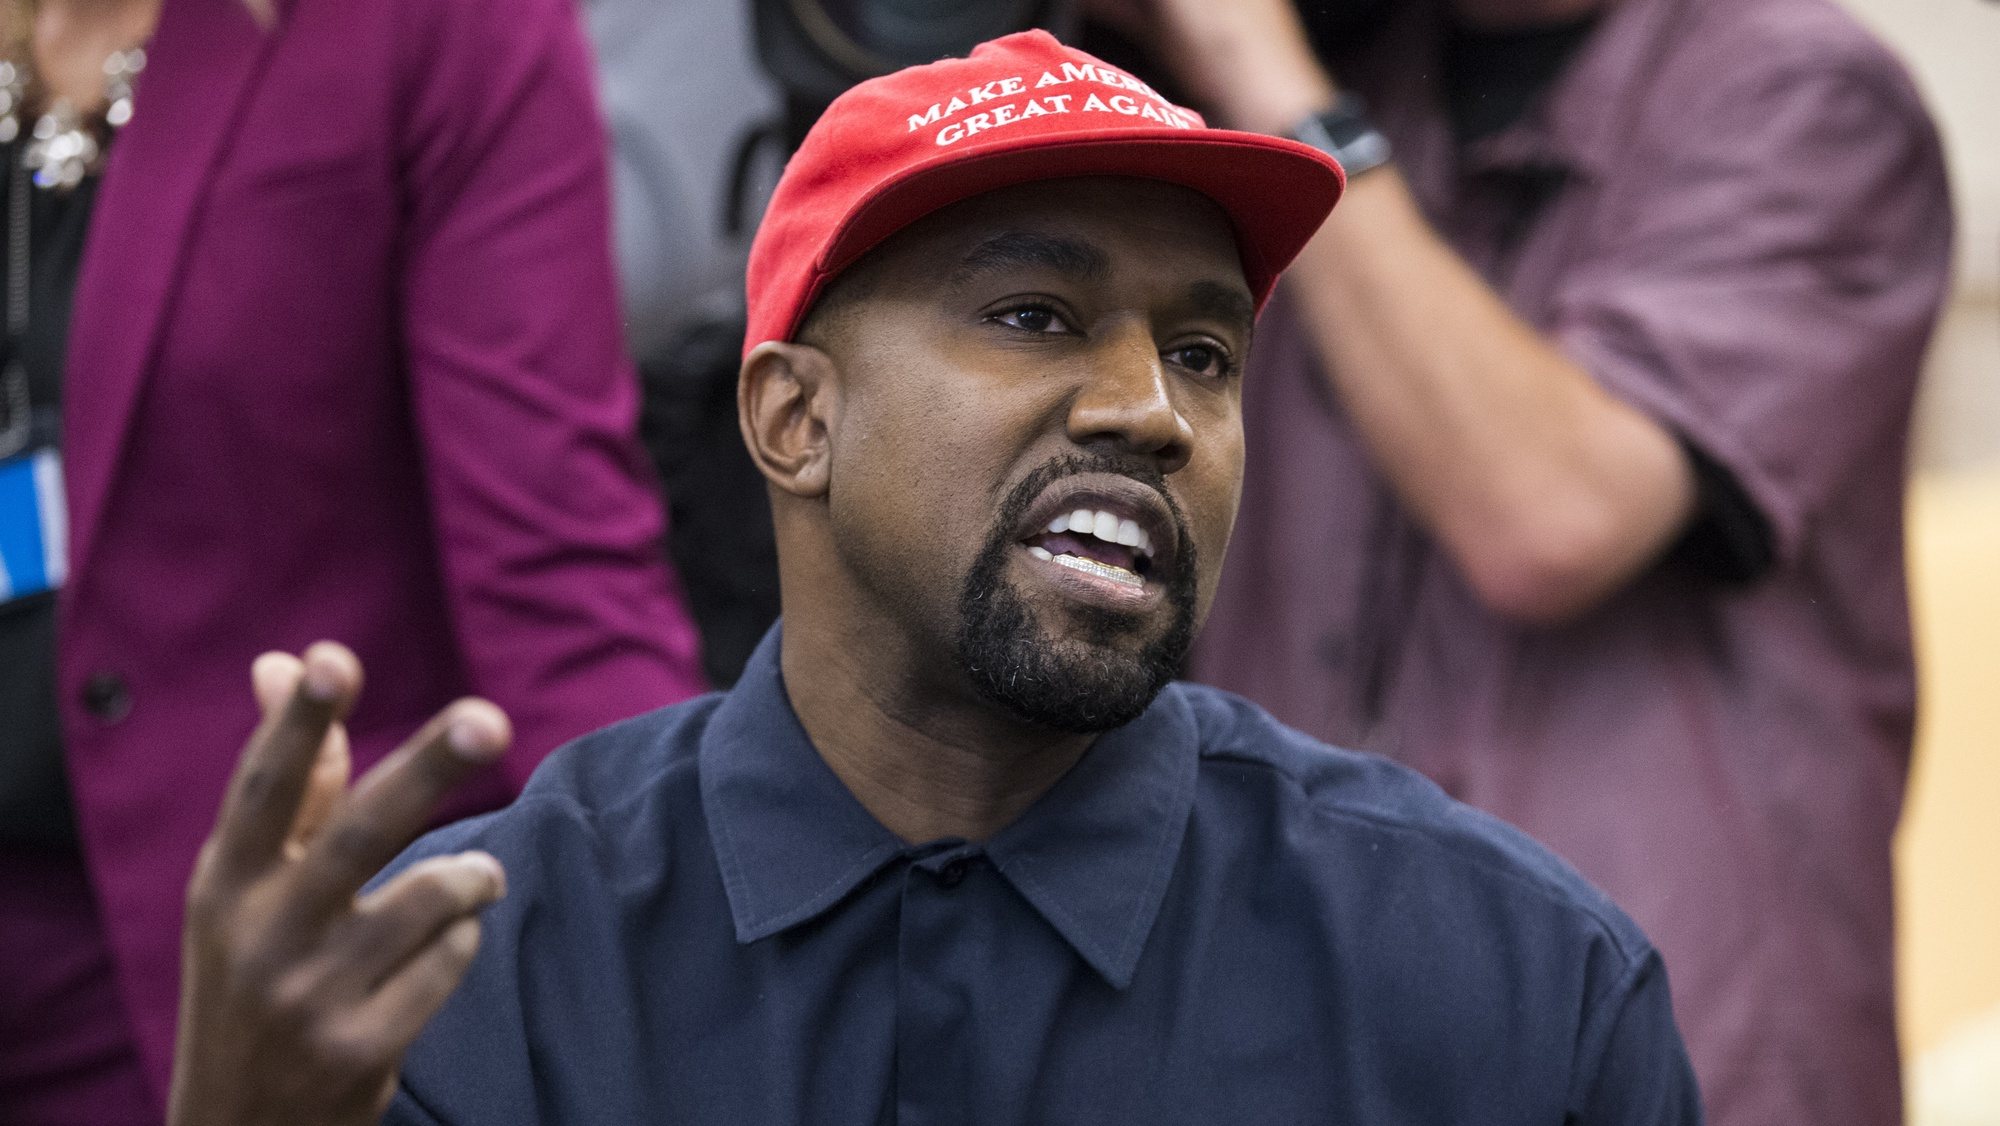 epa08528940 (FILE) - US entertainer Kanye West speaks during a meeting with US President Donald J. Trump in the Oval Office of the White House in Washington, DC, USA, 11 October 2018 (reissued 05 July 2020). West announced on twitter that he was &#039;running for president of the United States&#039;. The US will hold presidential elections on November 3, 2020.  EPA/MICHAEL REYNOLDS *** Local Caption *** 54693752